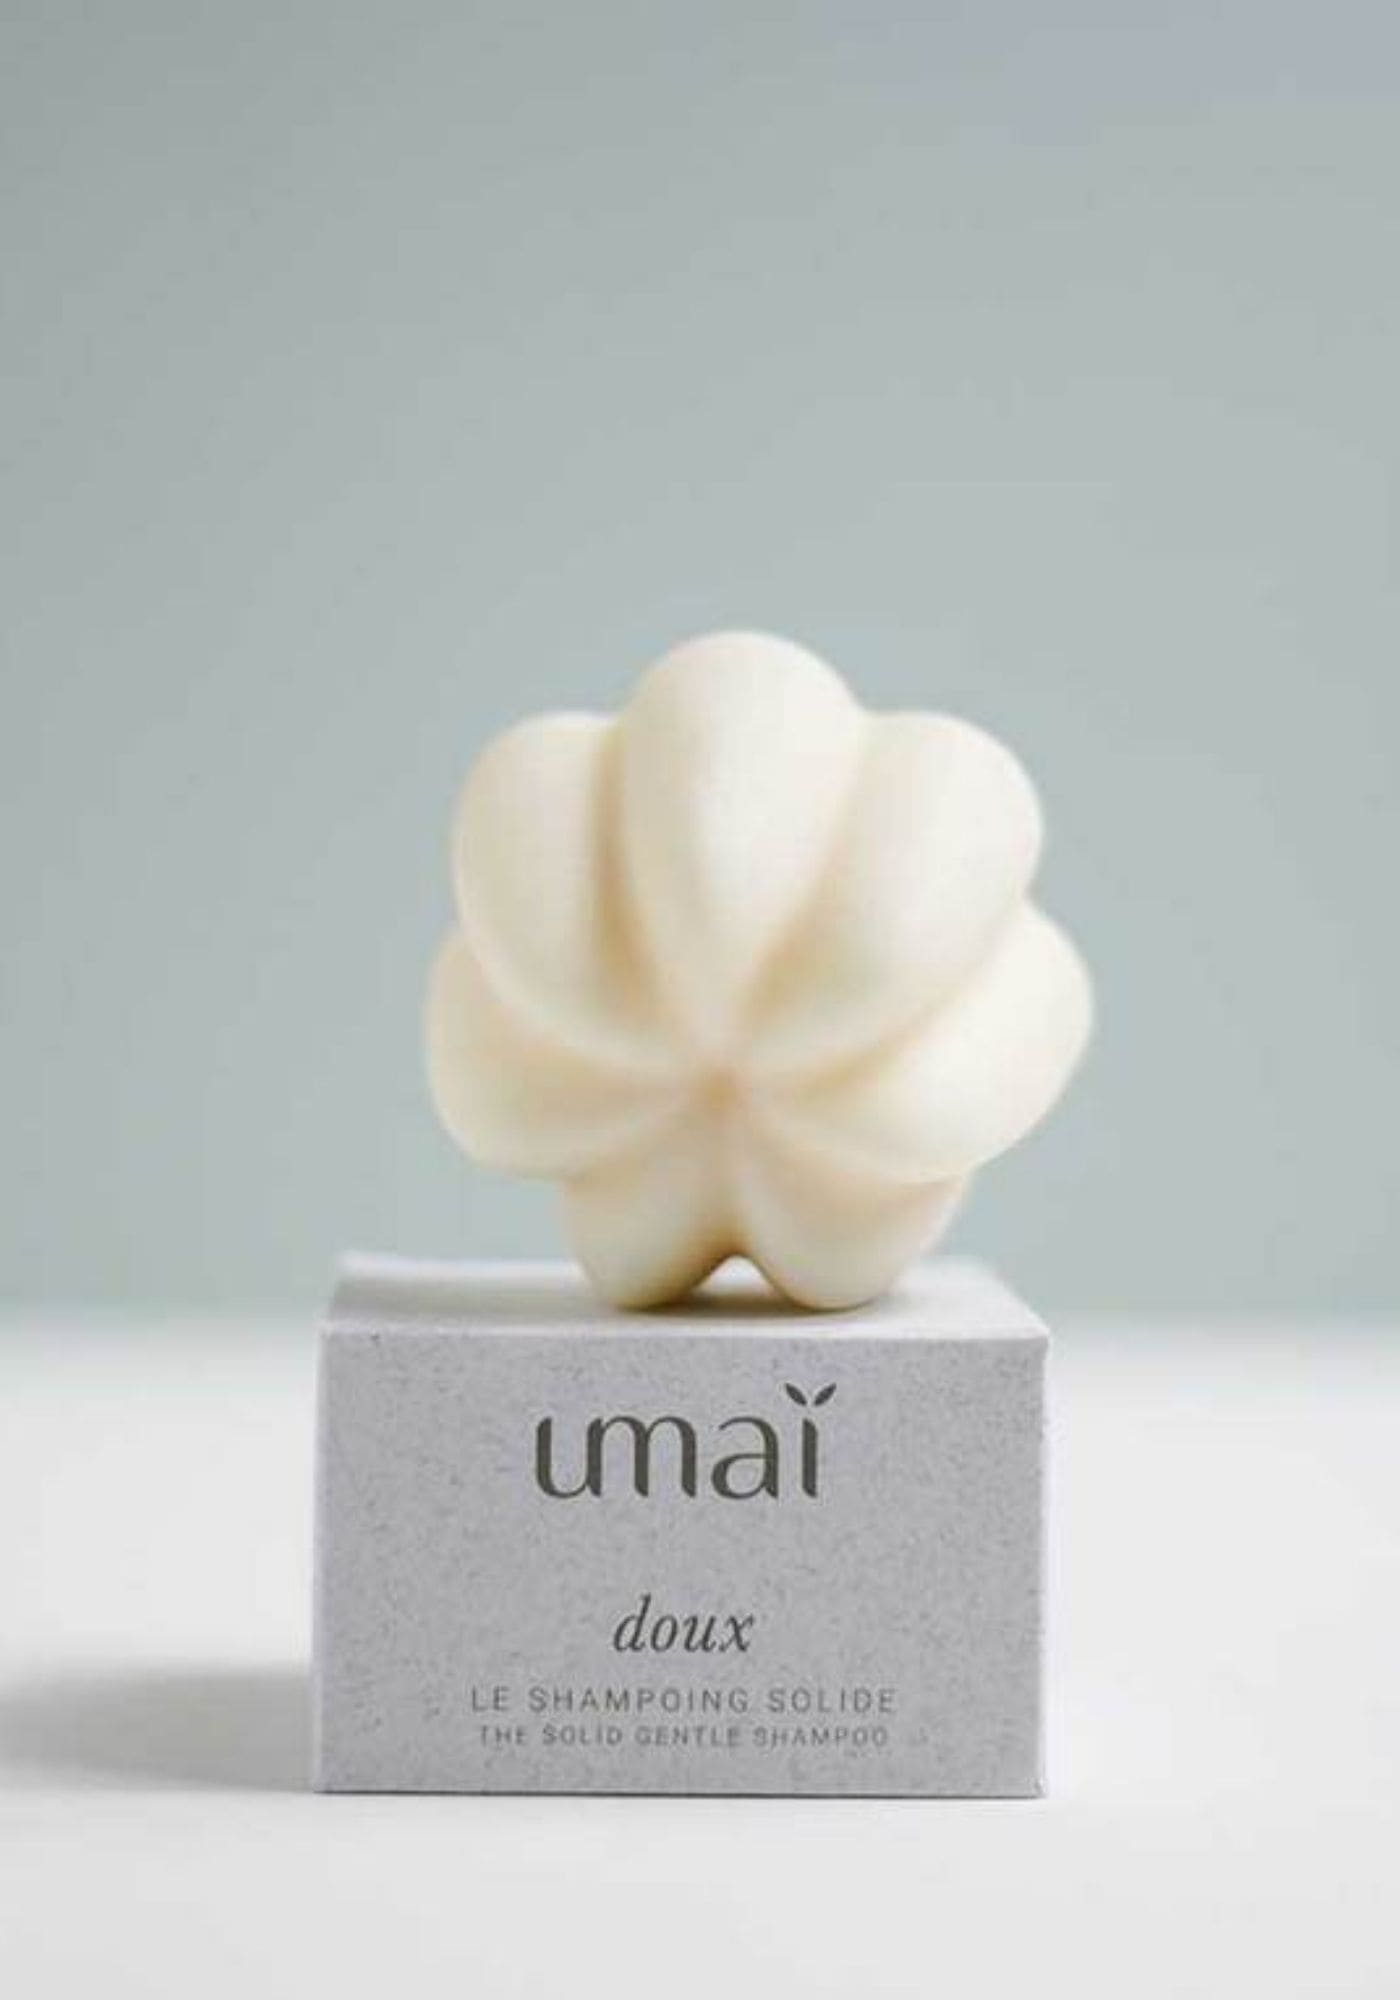 umai-shampoing-solide-doux-bio-sans-gluten-made-in-france